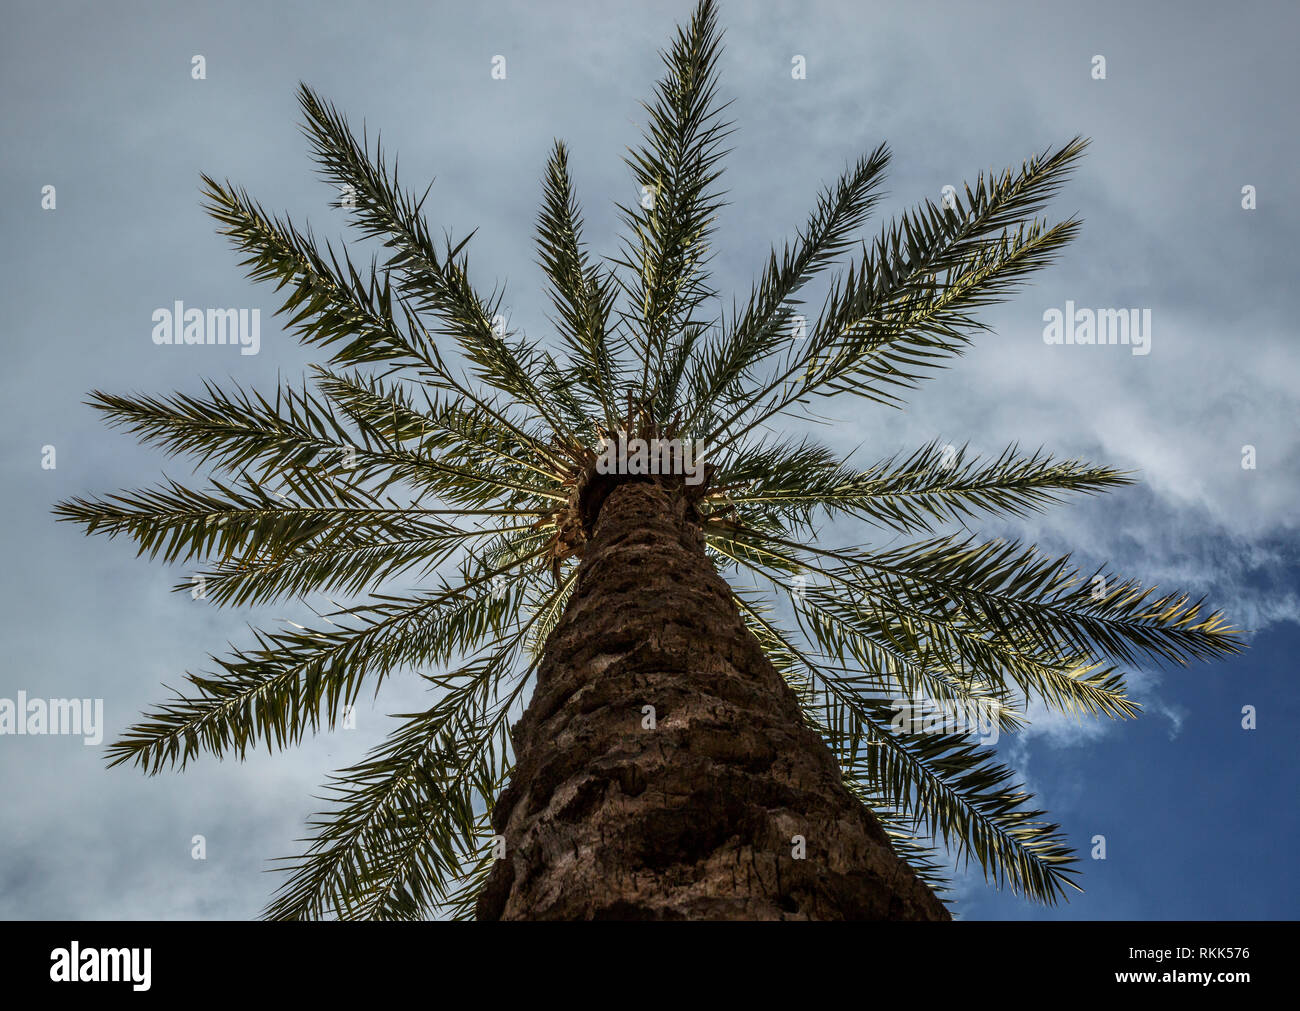 Circular pattern of palm tree branches against cloudy sky Stock Photo